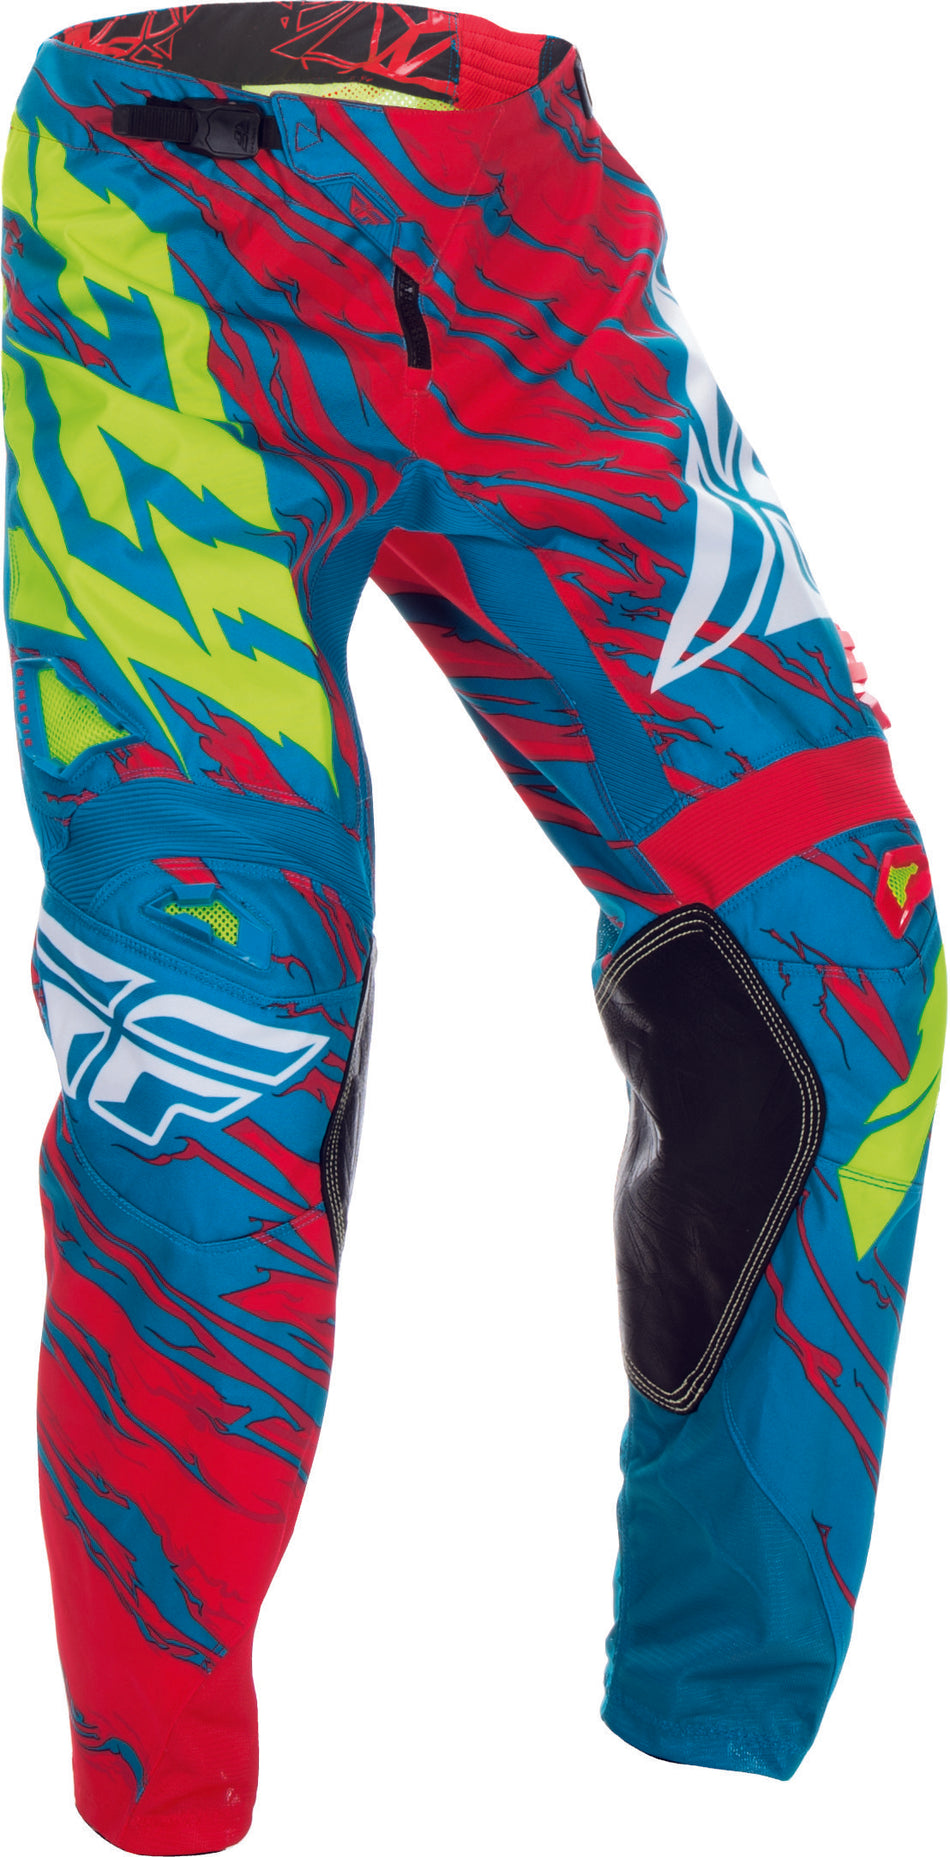 FLY RACING Kinetic Relapse Pant Teal/Red Sz 28s 370-43928S